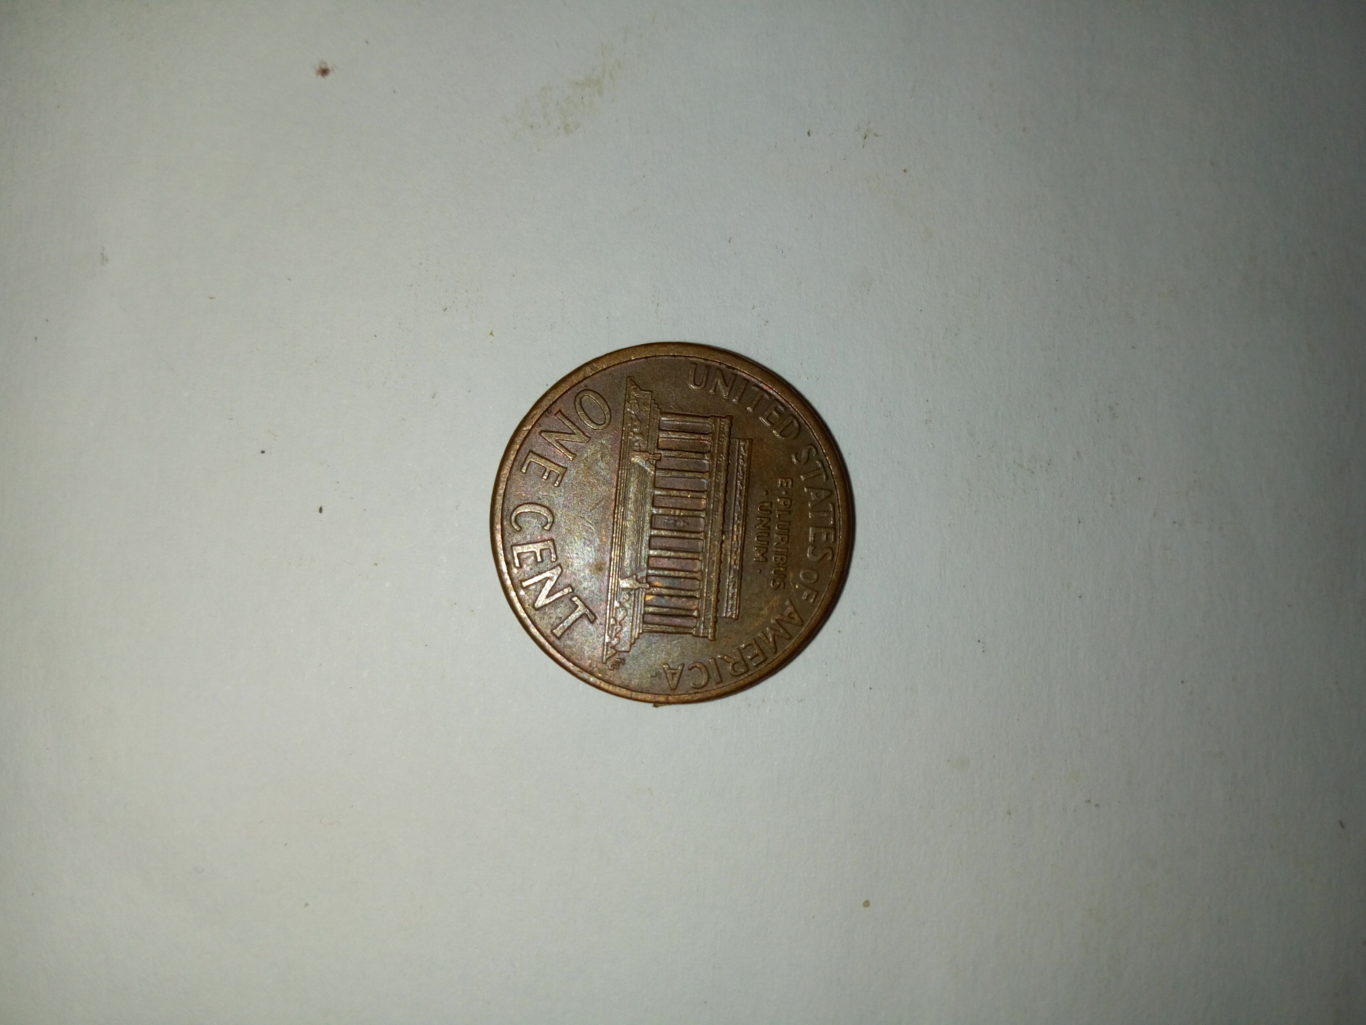 1993_united States of america 1 cent